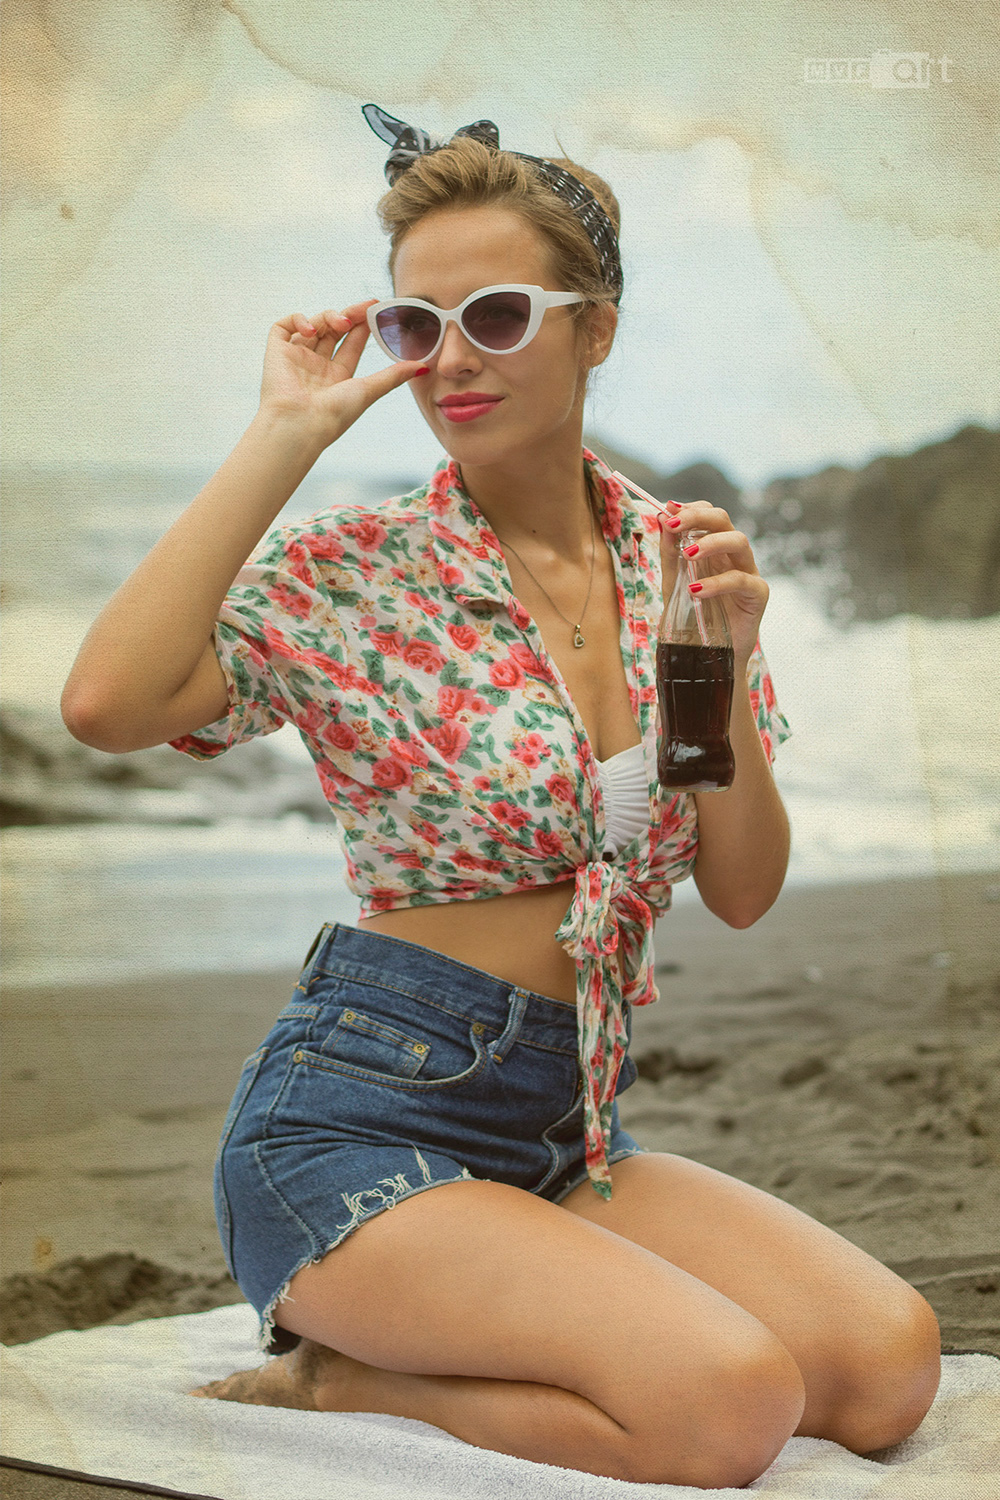 pin up girl beach pinup beauty woman Retro 50's 80's vintage Portugal old story summer sexy